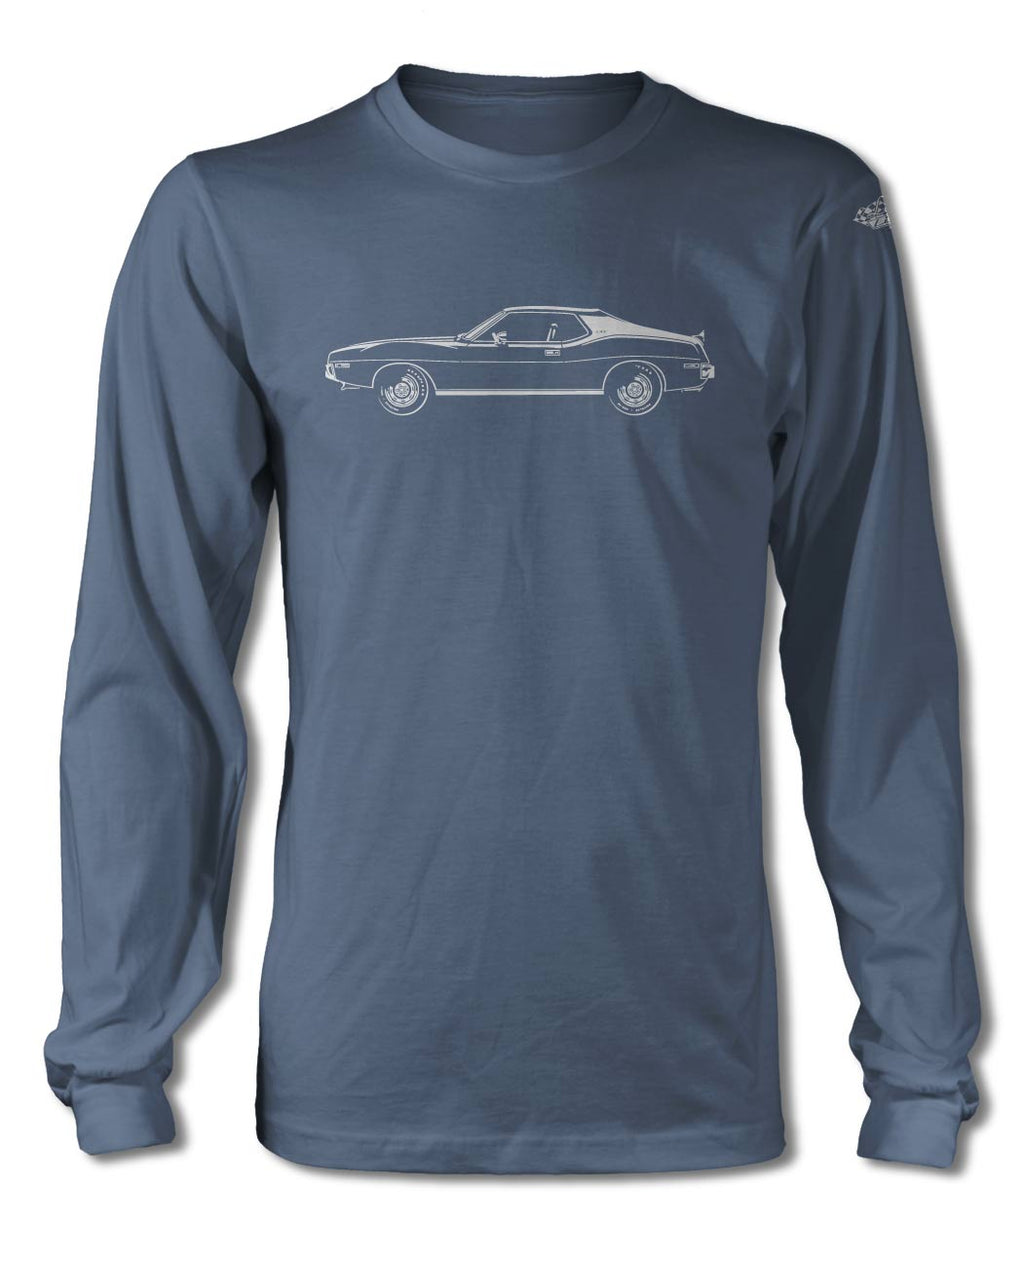 1974 AMC AMX Coupe T-Shirt - Long Sleeves - Side View